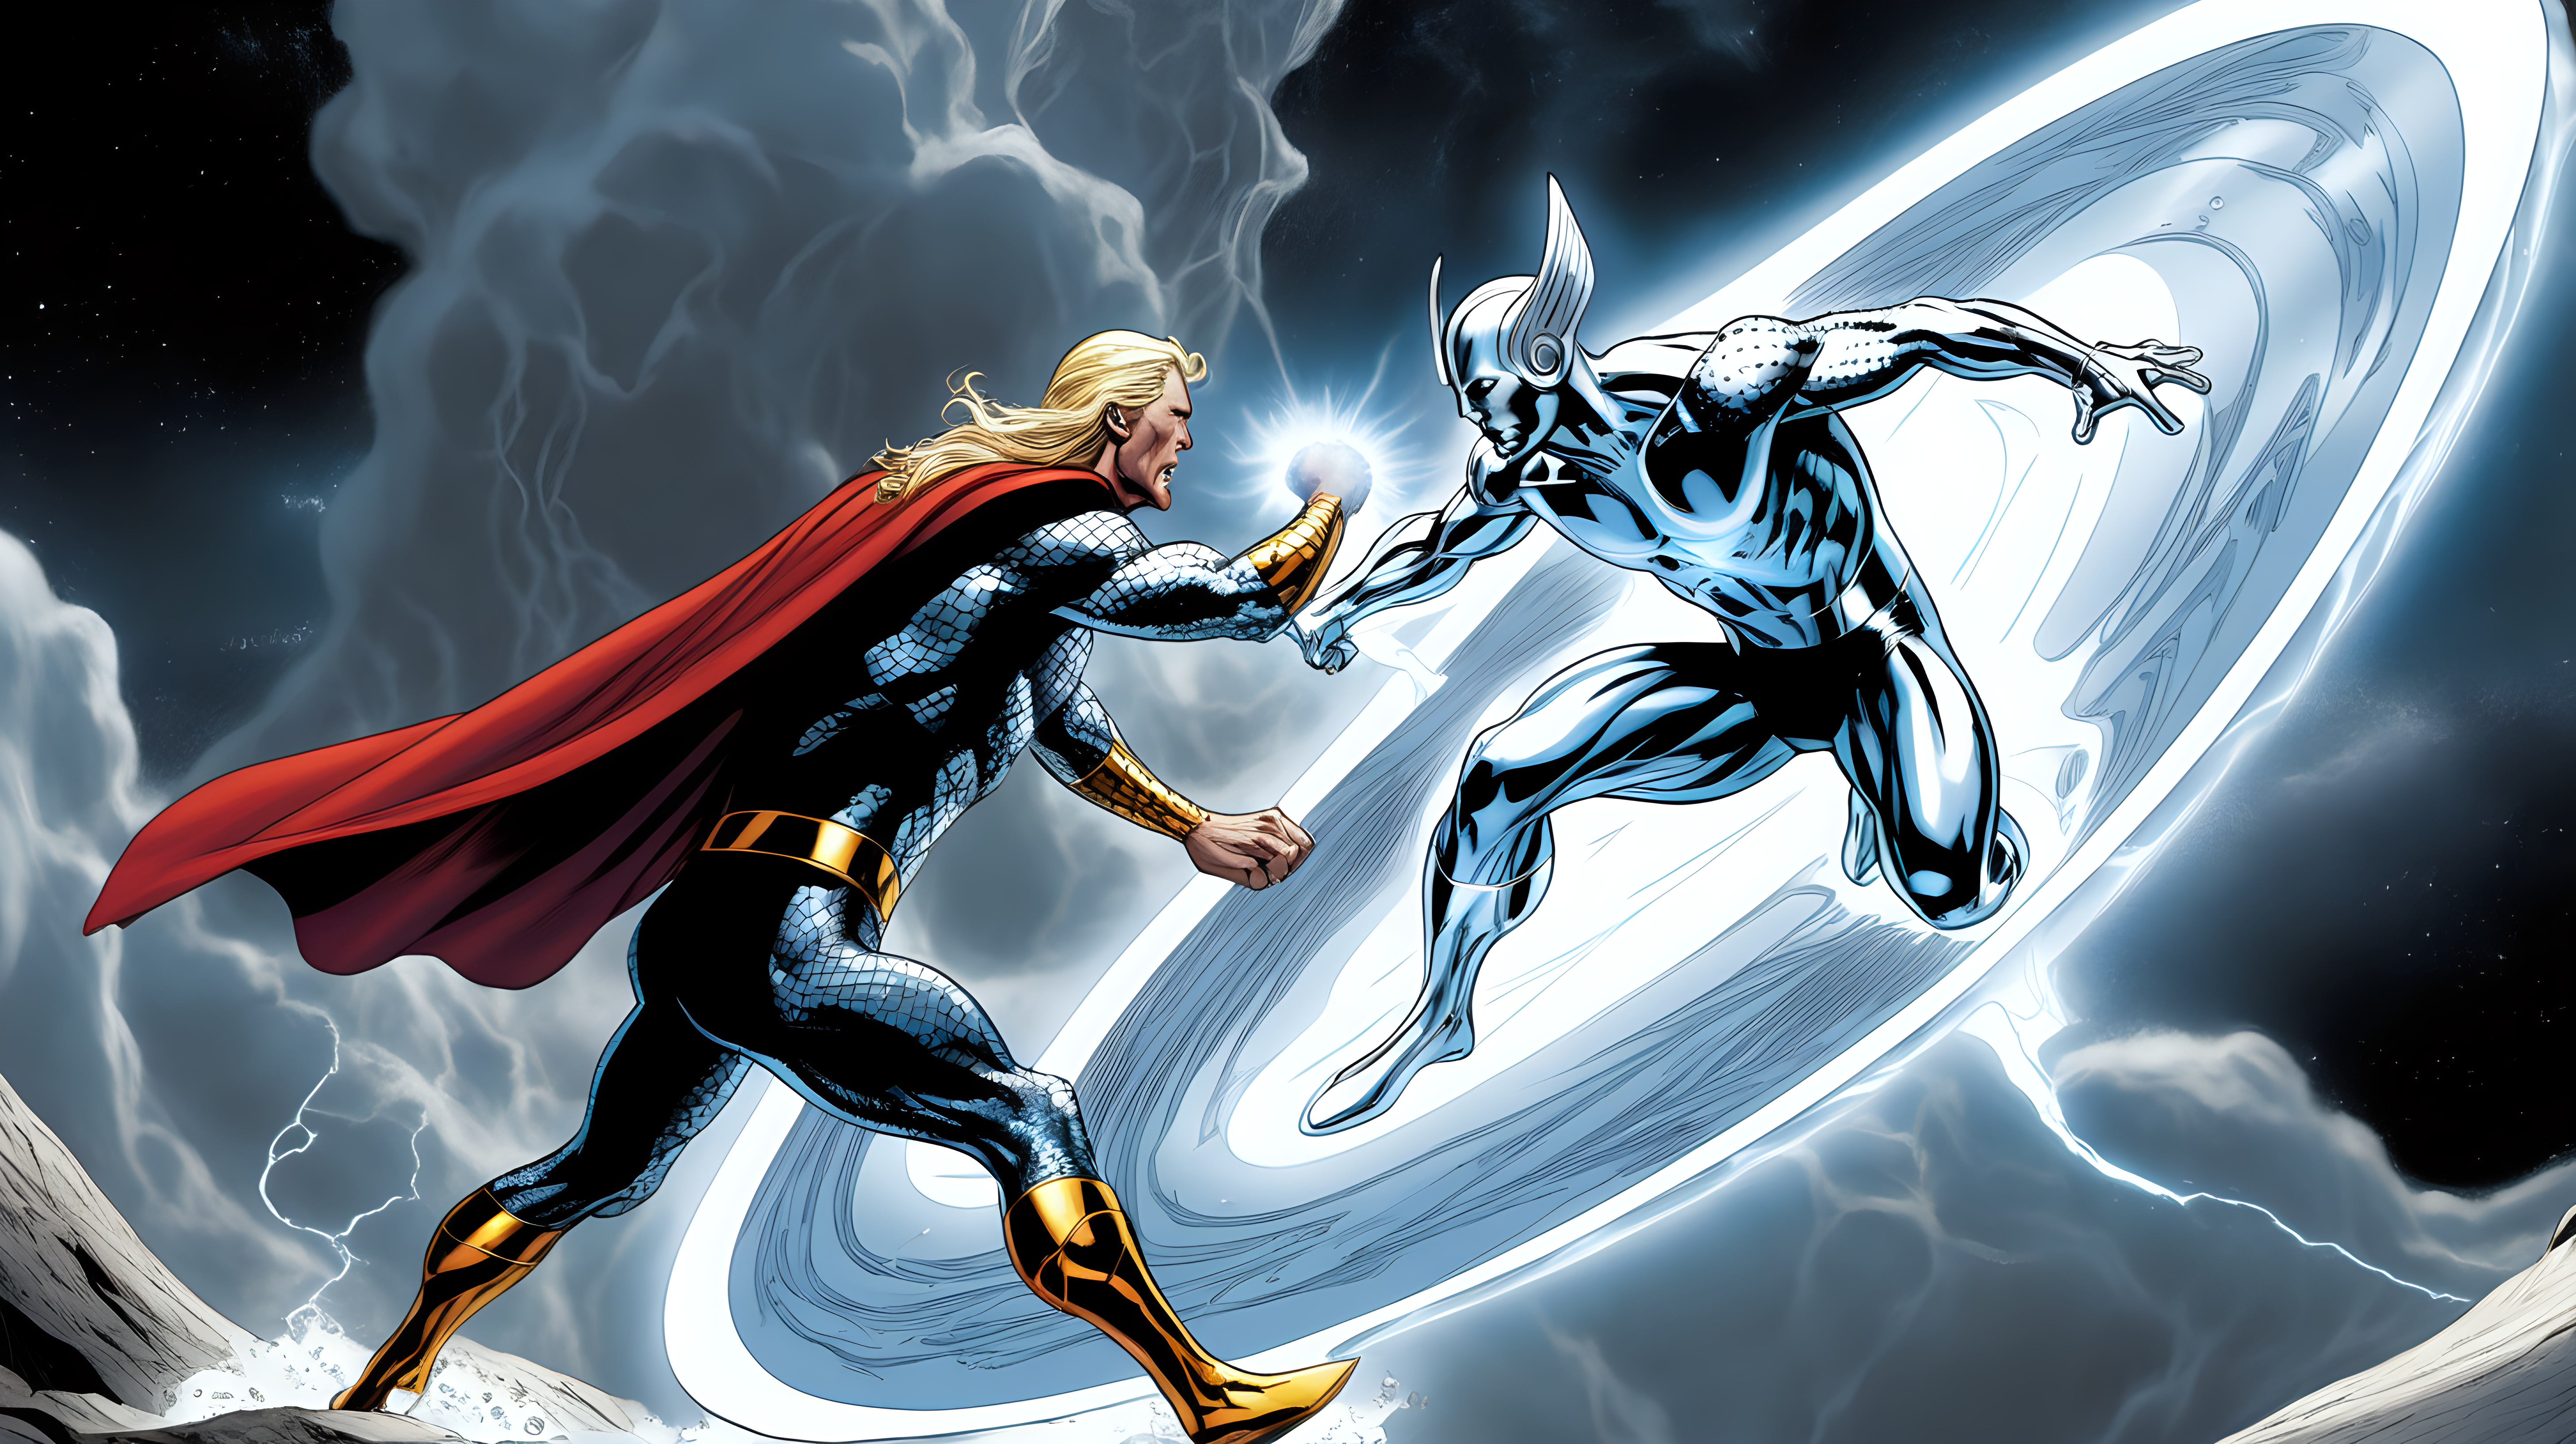 The Silver Surfer fighting Thor on Asgard